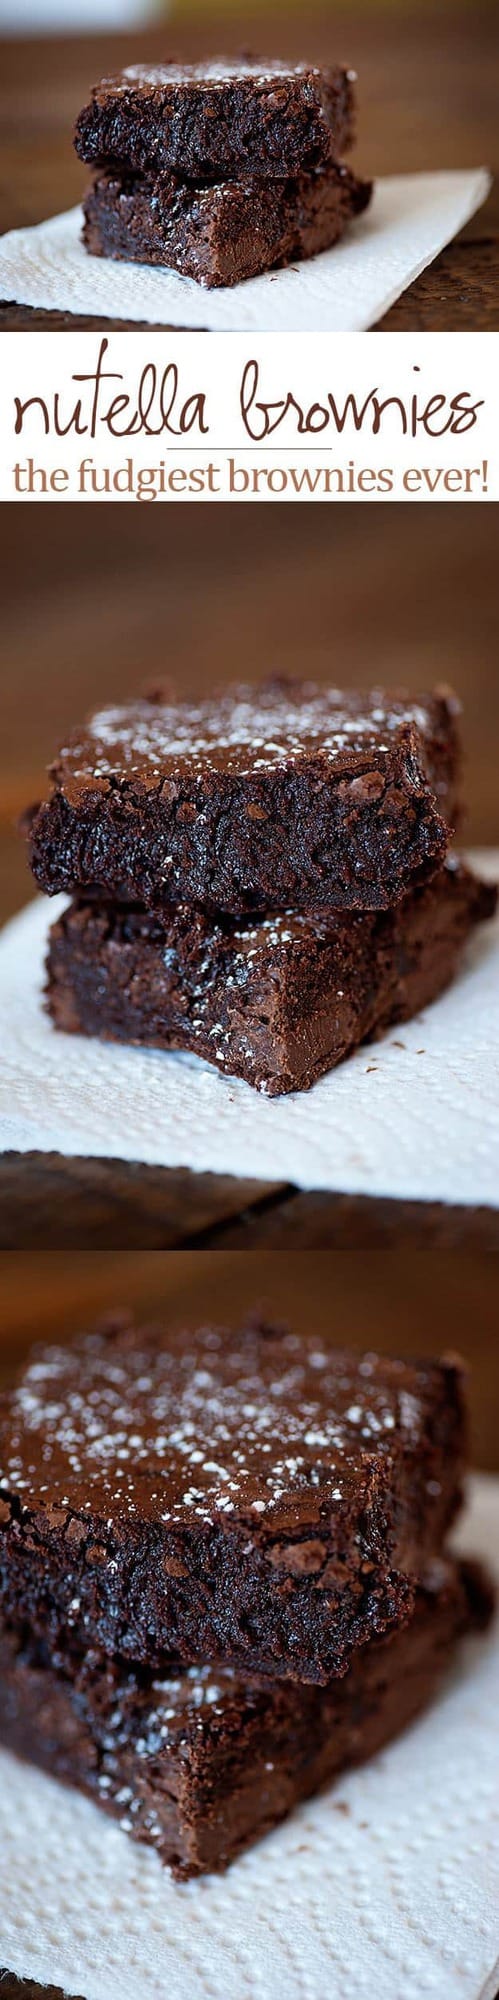 Super fudgy Nutella brownies...these are so rich and full of chocolate!